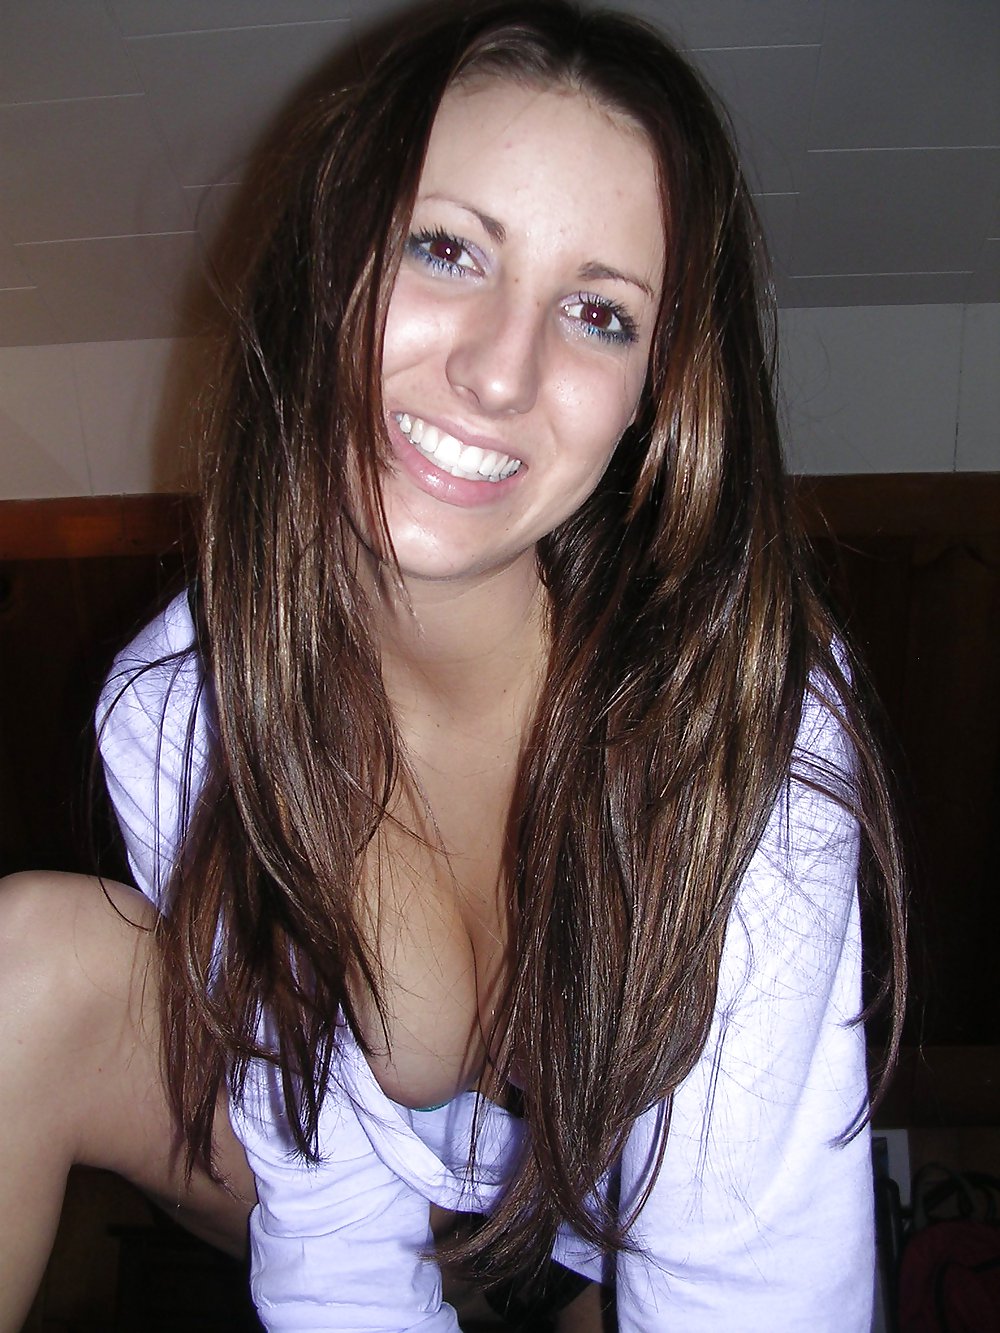 Hot and Sweet Brunette Amateur Teen ... !!! adult photos